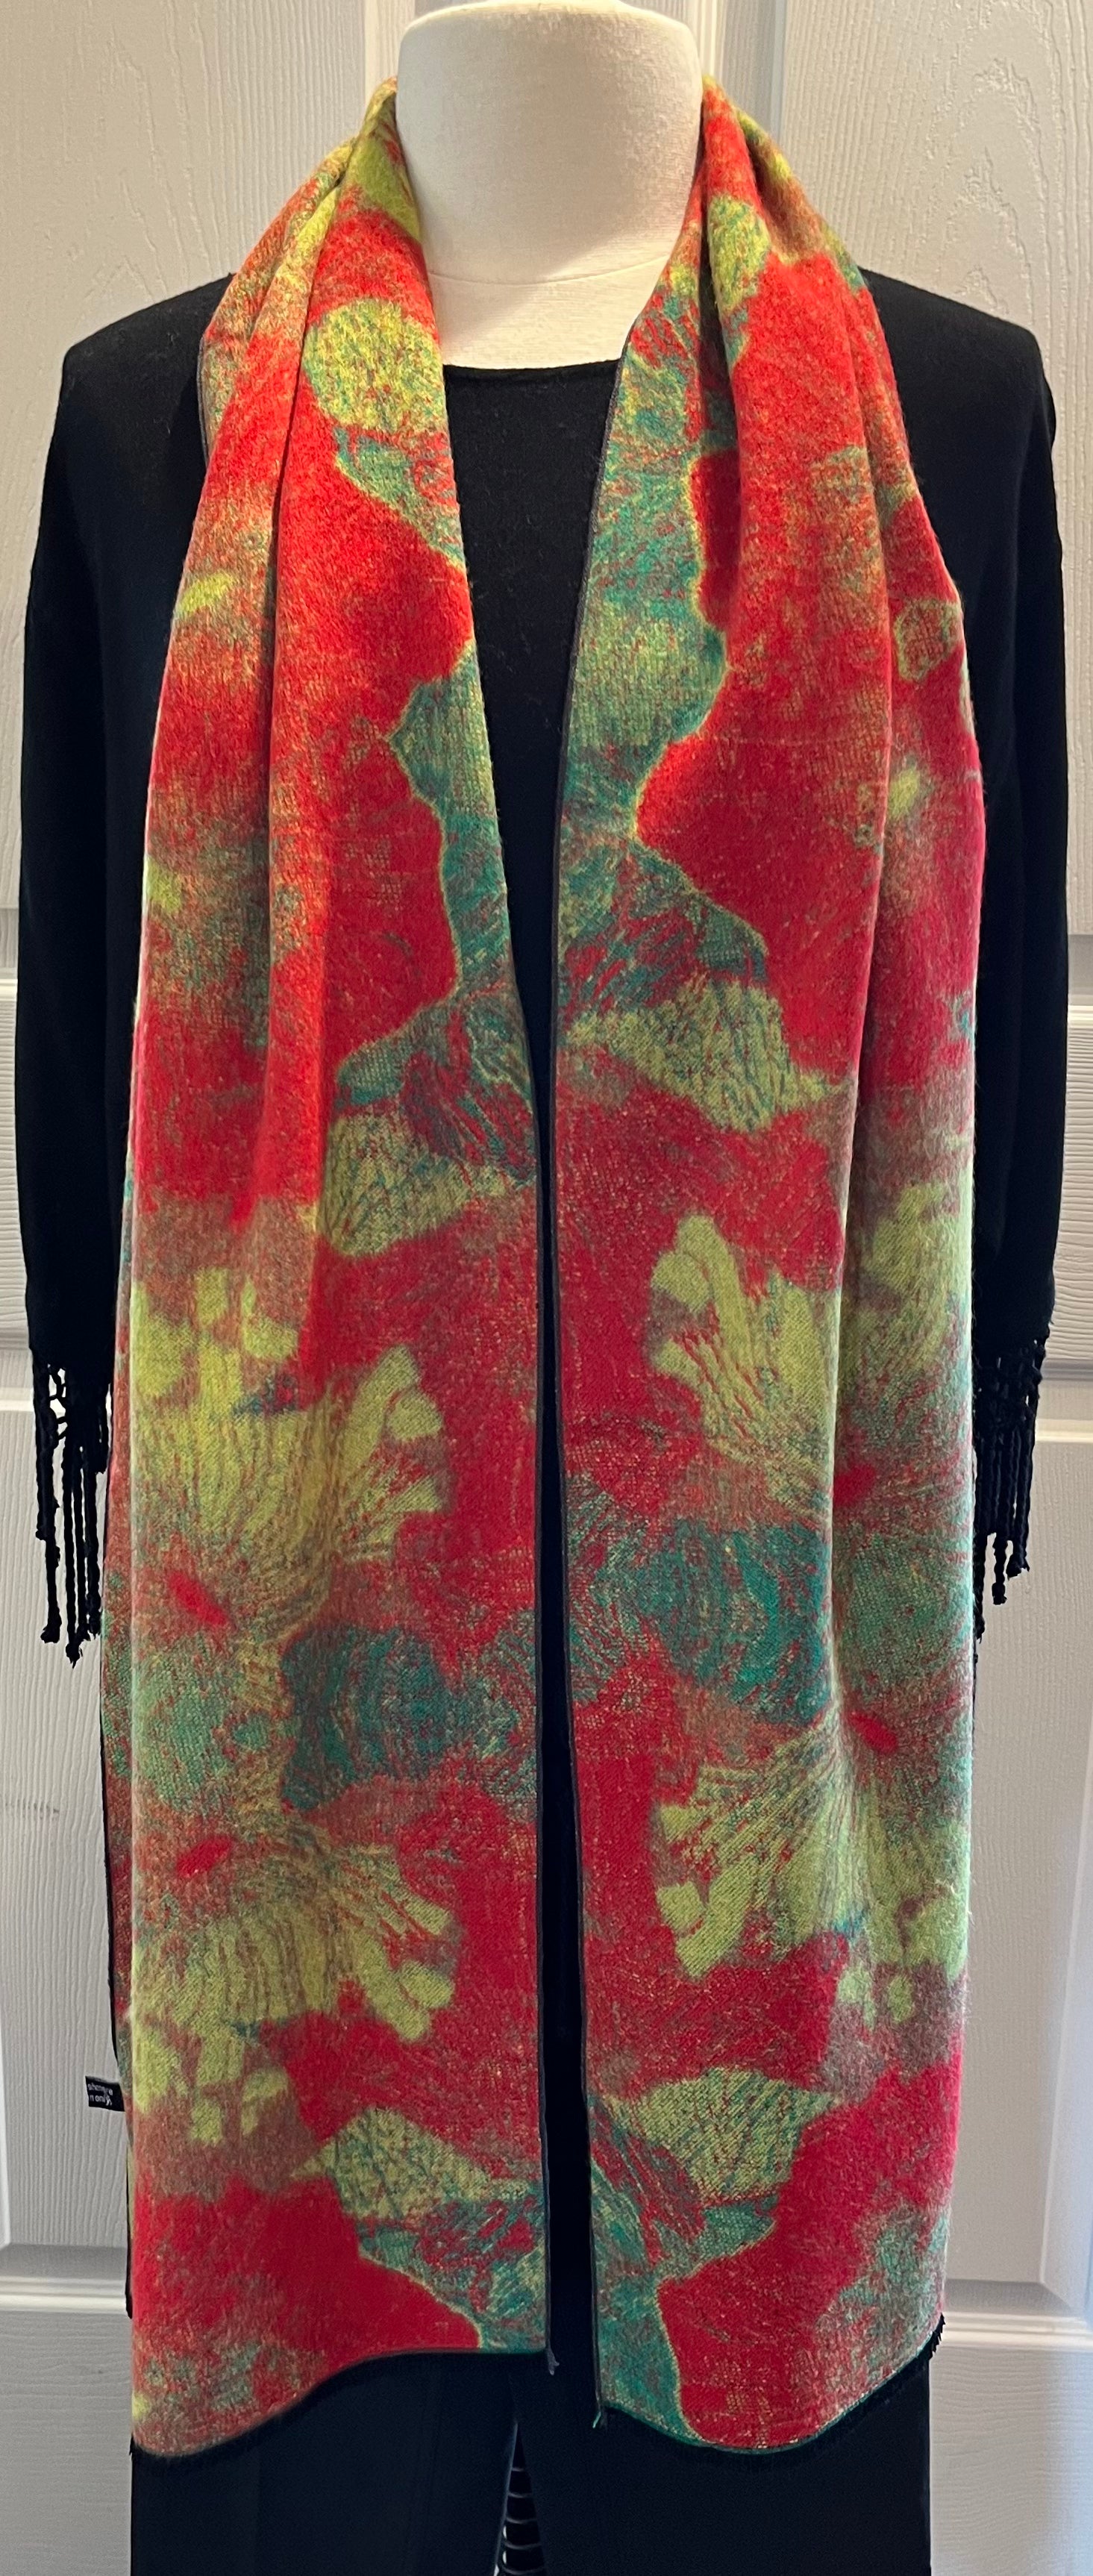 Red & Green Reversible Cashmere Scarf